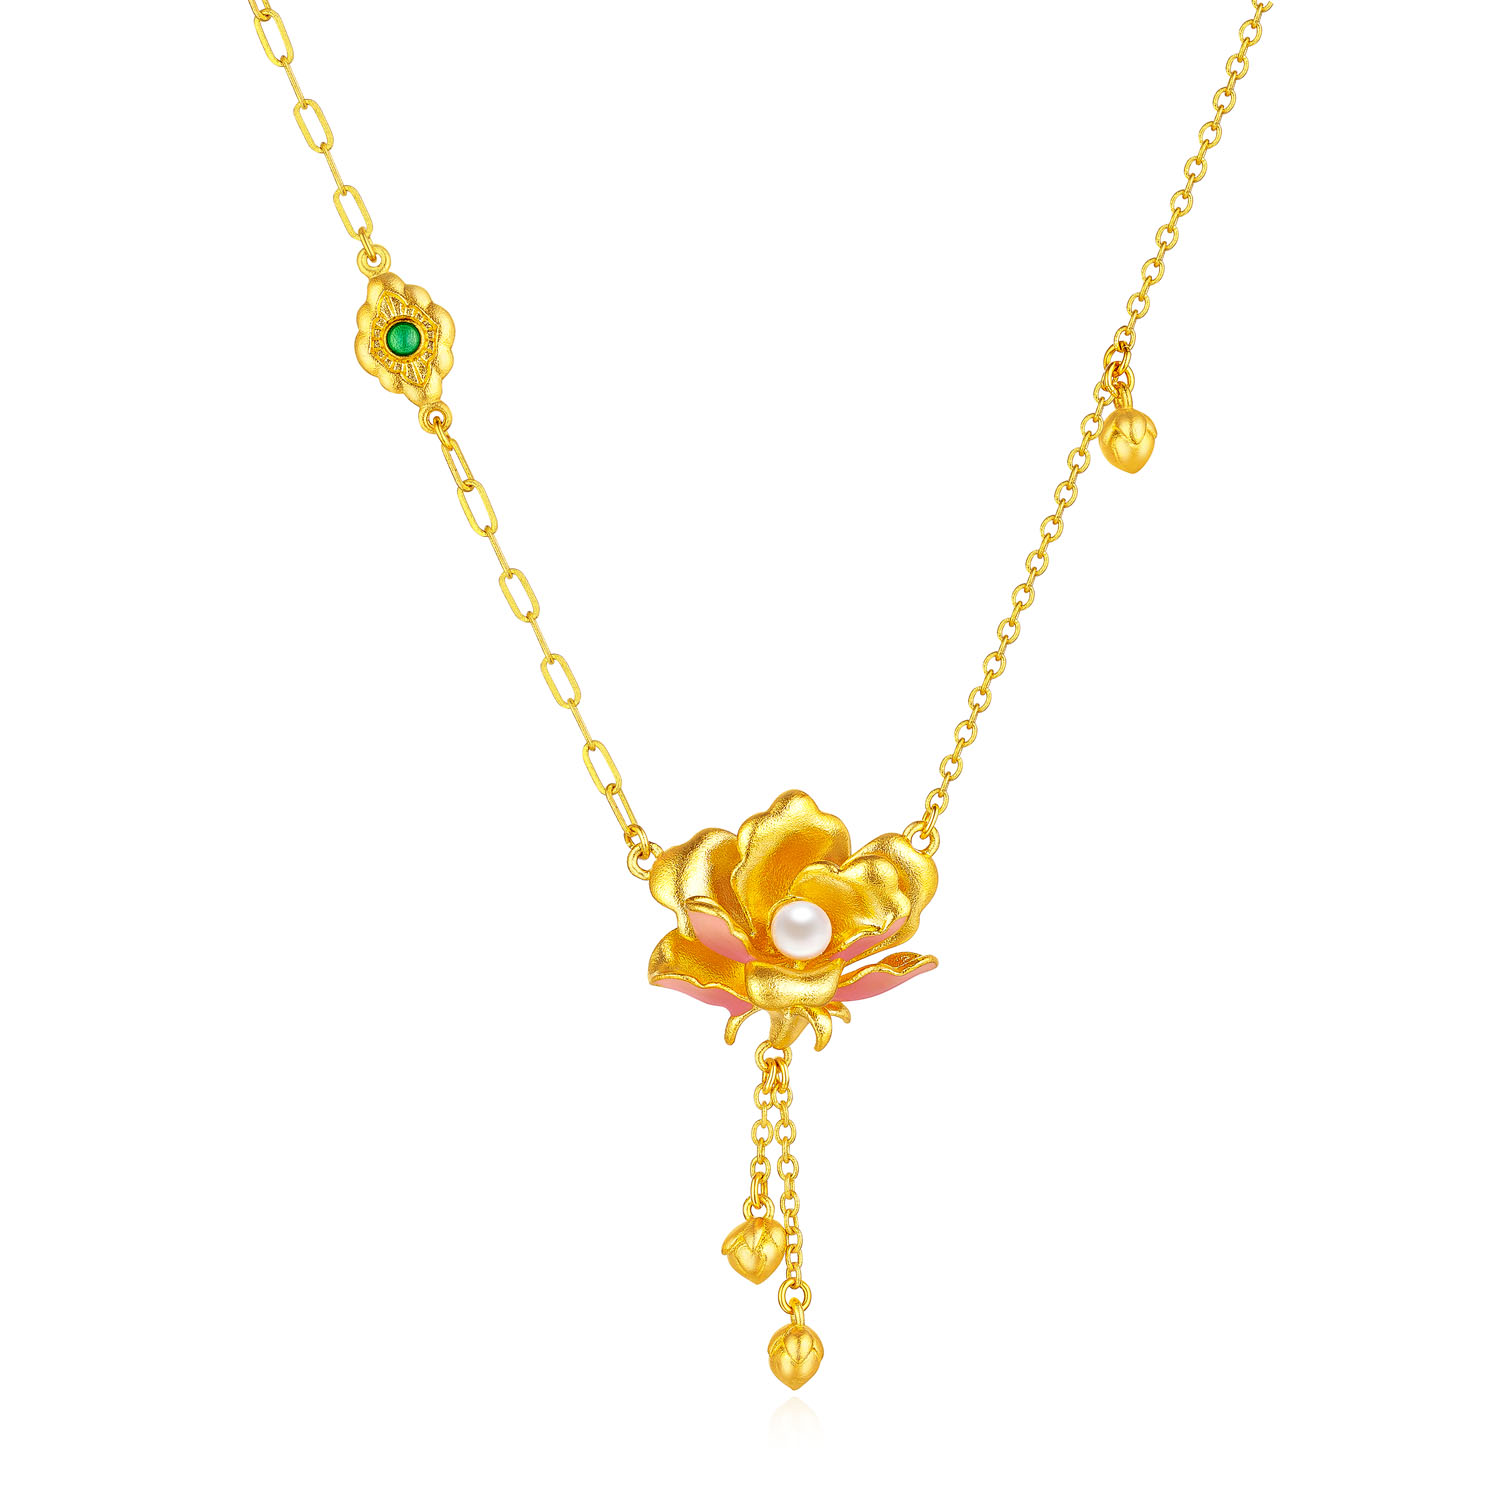 Heirloom Fortune - Charm of Song Dynasty Collection "Lotus Blossom" Gold Pearl Necklace